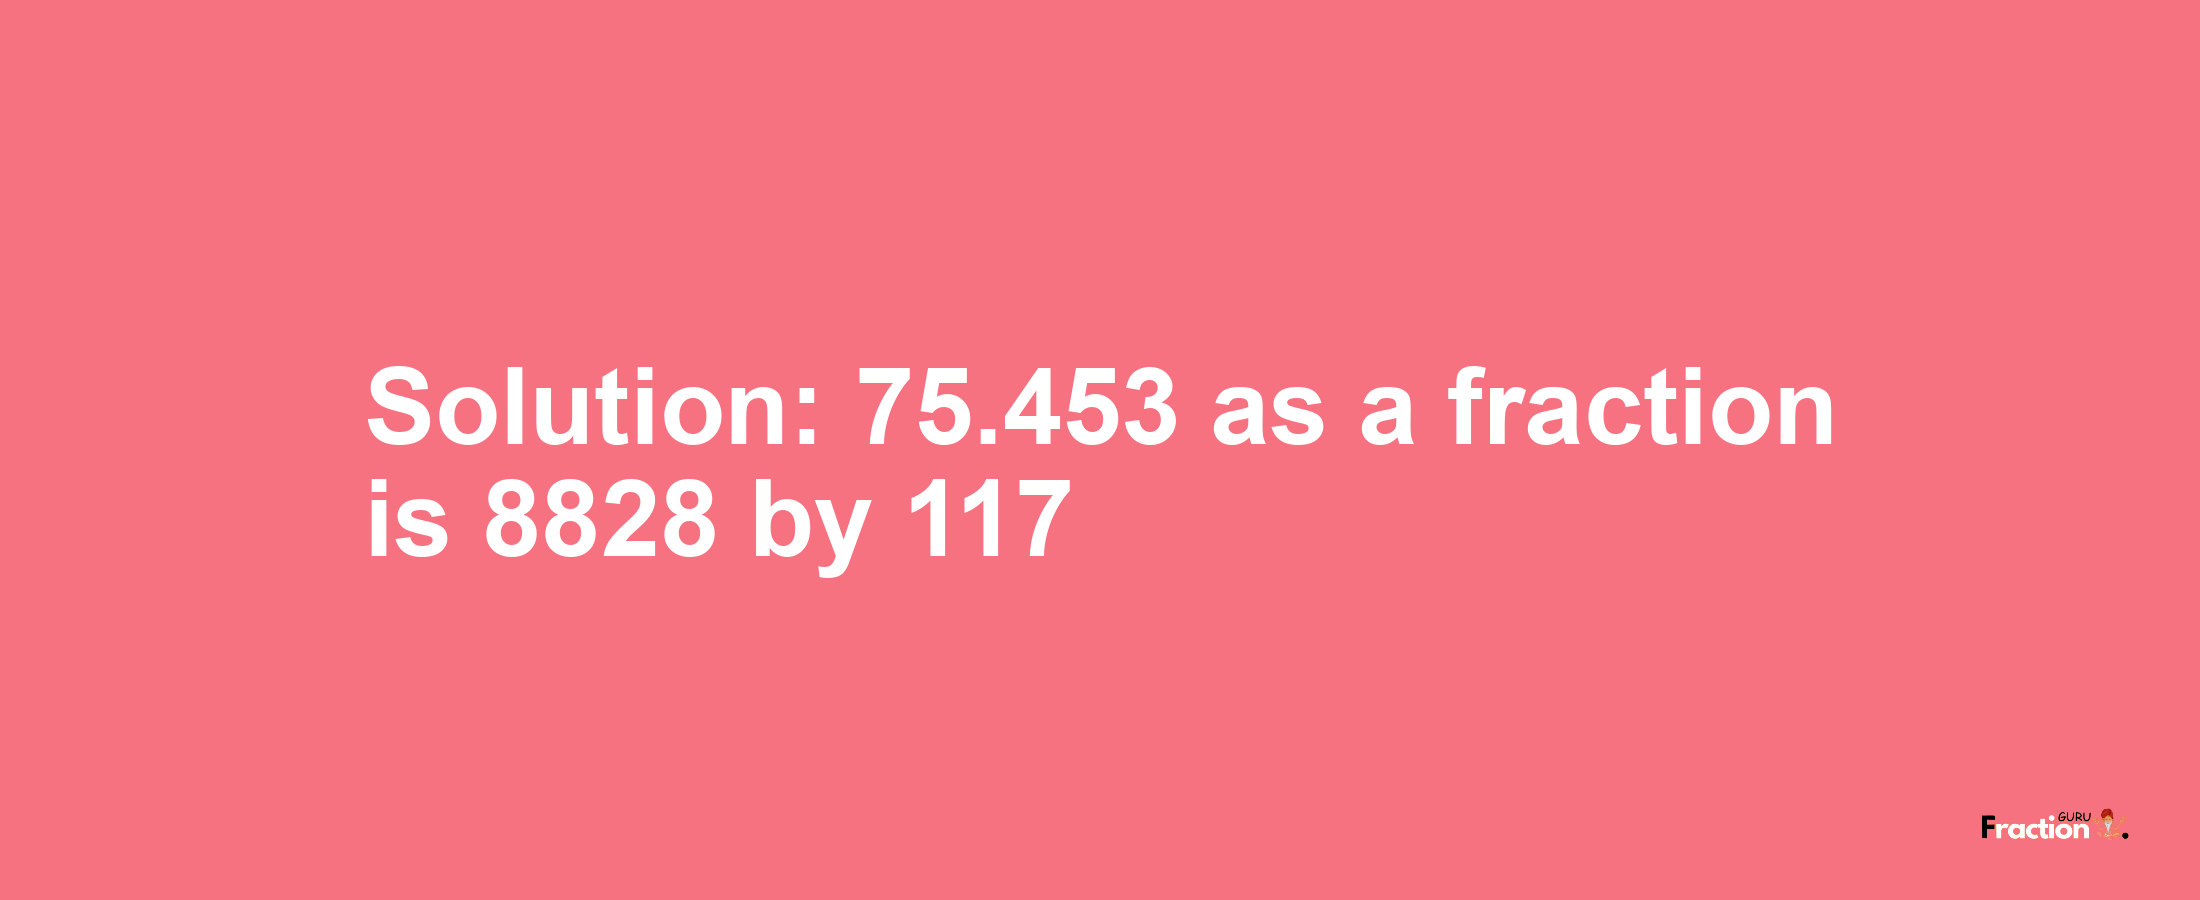 Solution:75.453 as a fraction is 8828/117